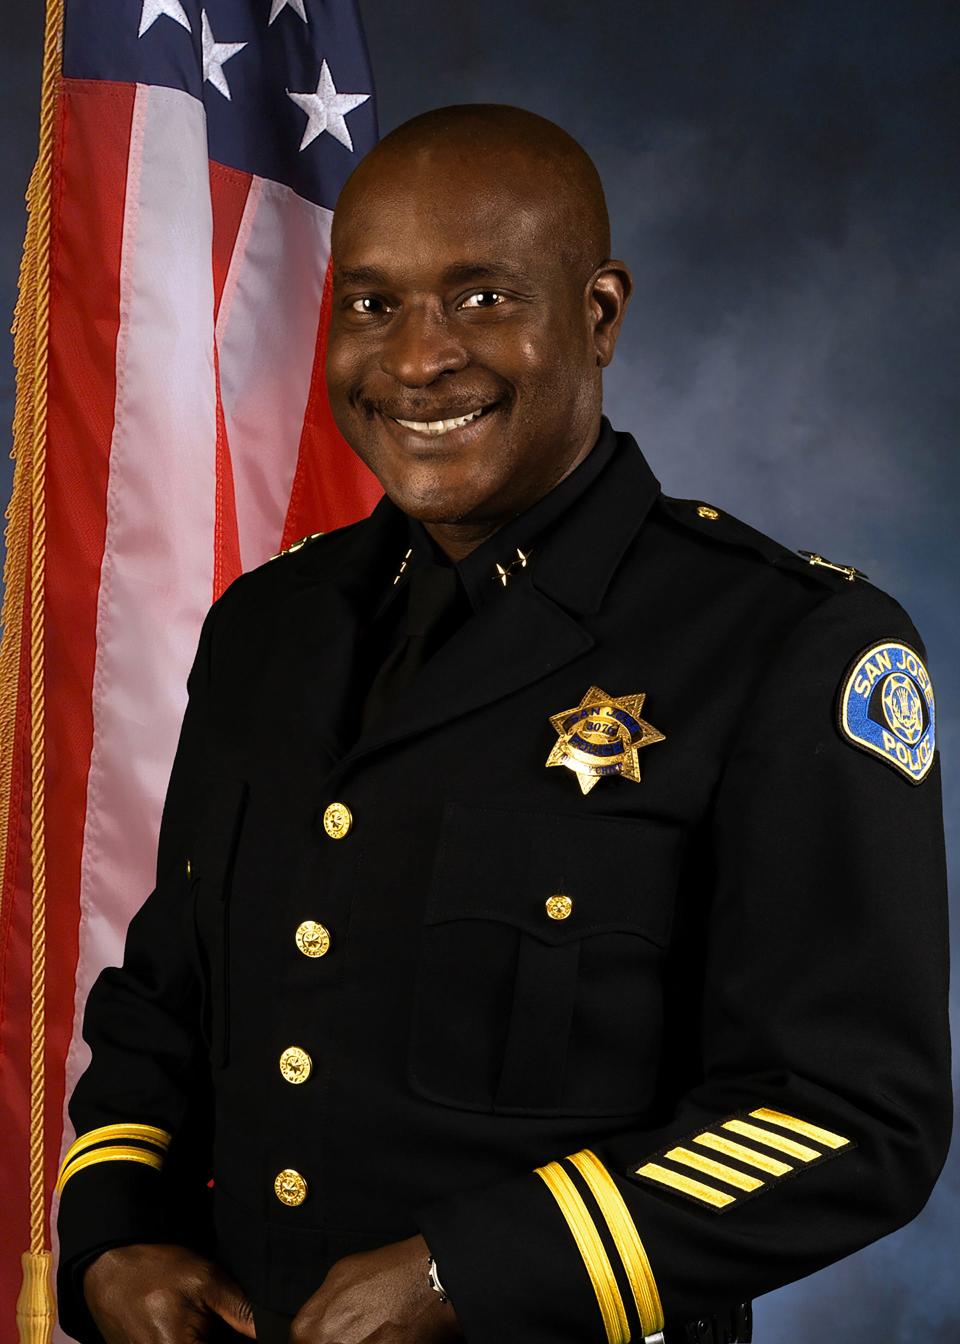 Stan McFadden will be Stockton's 50th police chief and the first Black man to head the department in the city's 172-year history.